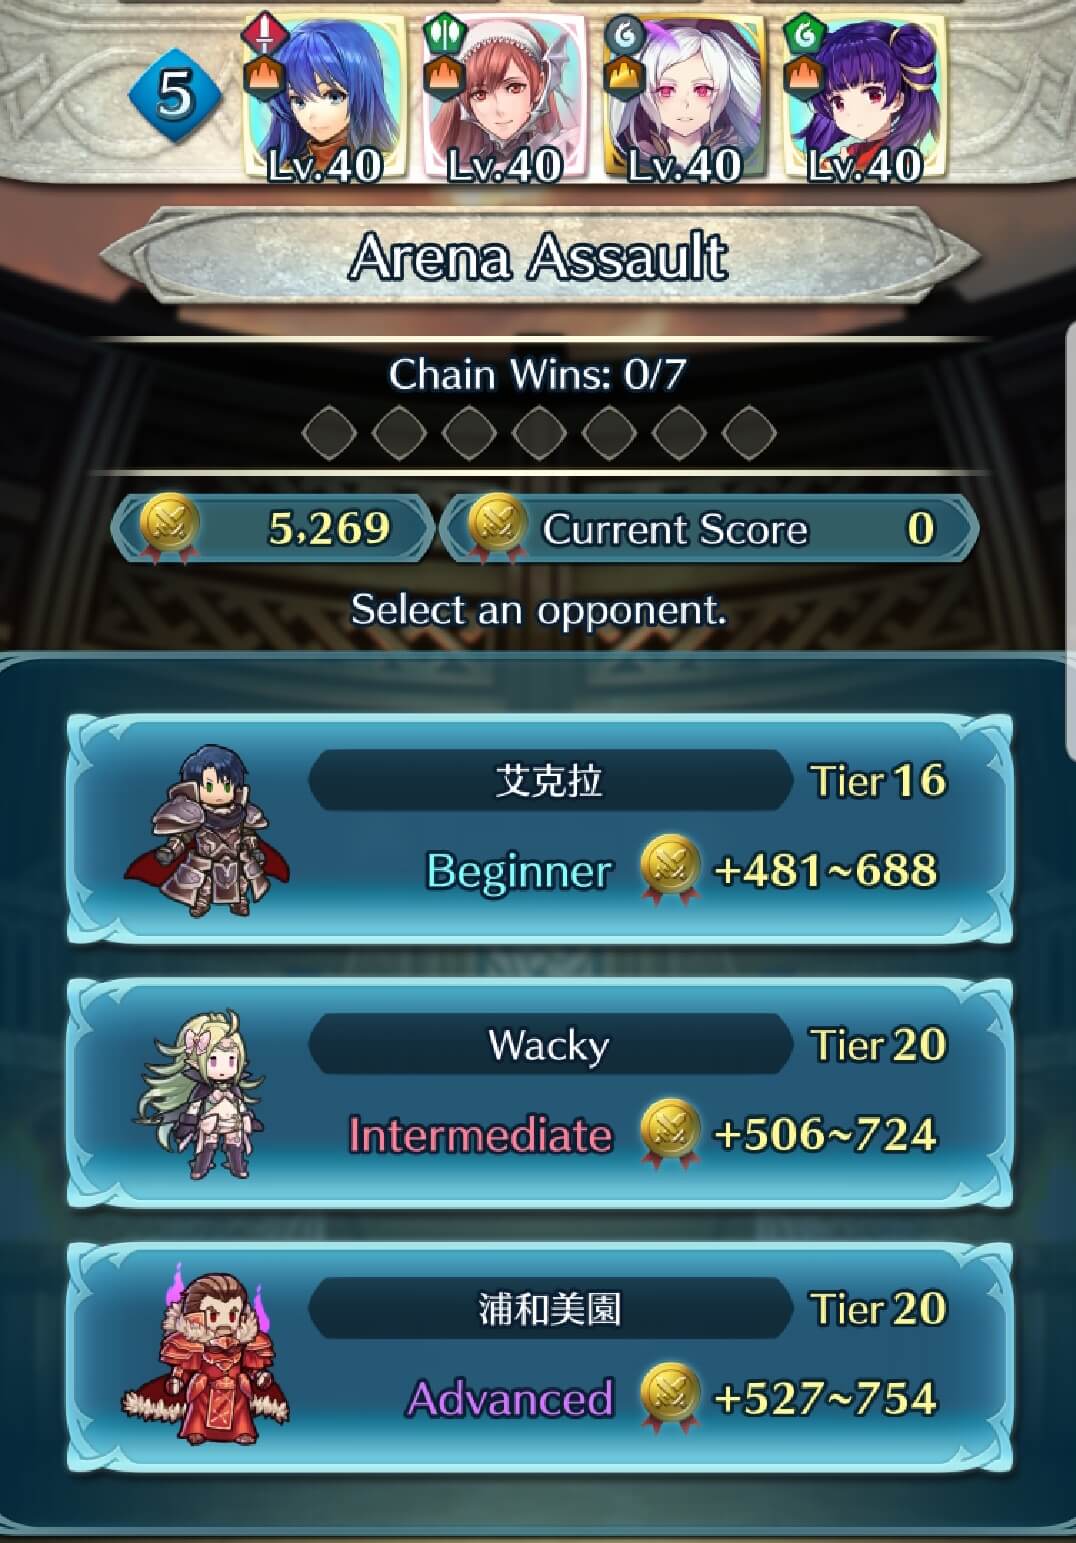 Using high merged units with blessings can seed high scores